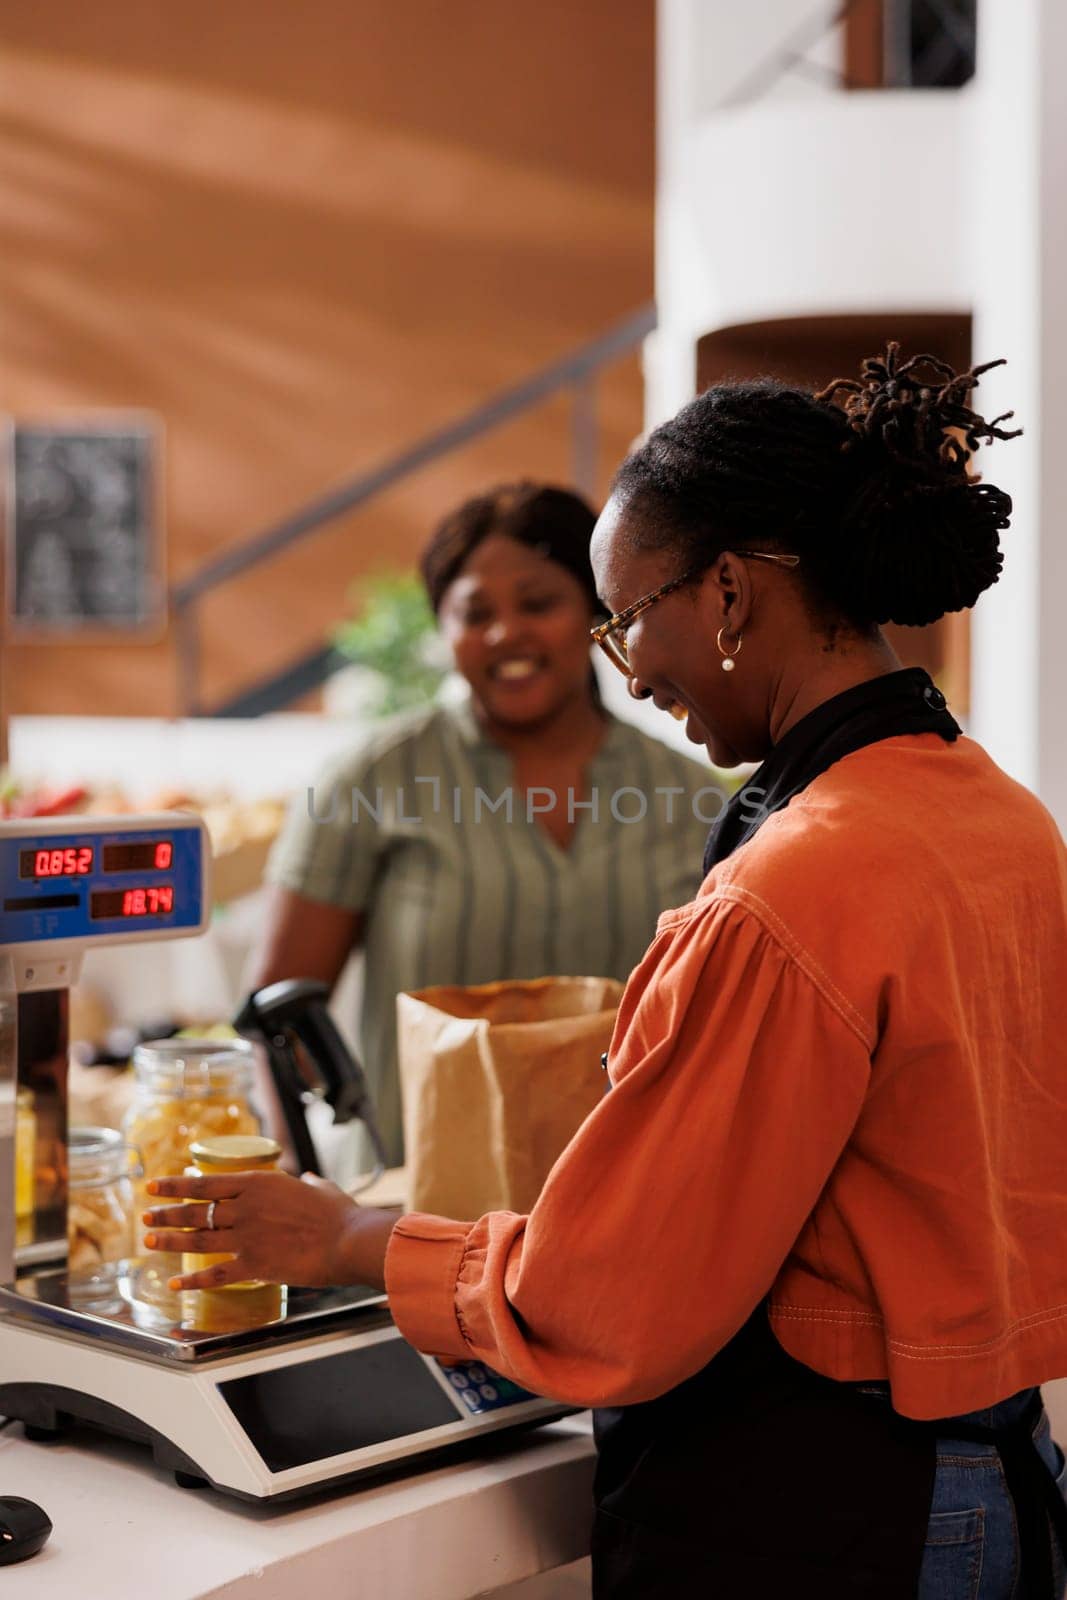 Female customer at a grocery store checkout counter with a smiling storekeeper weighing products on digital scale. Friendly vendor measuring weight of bio food items while client waits at desk.